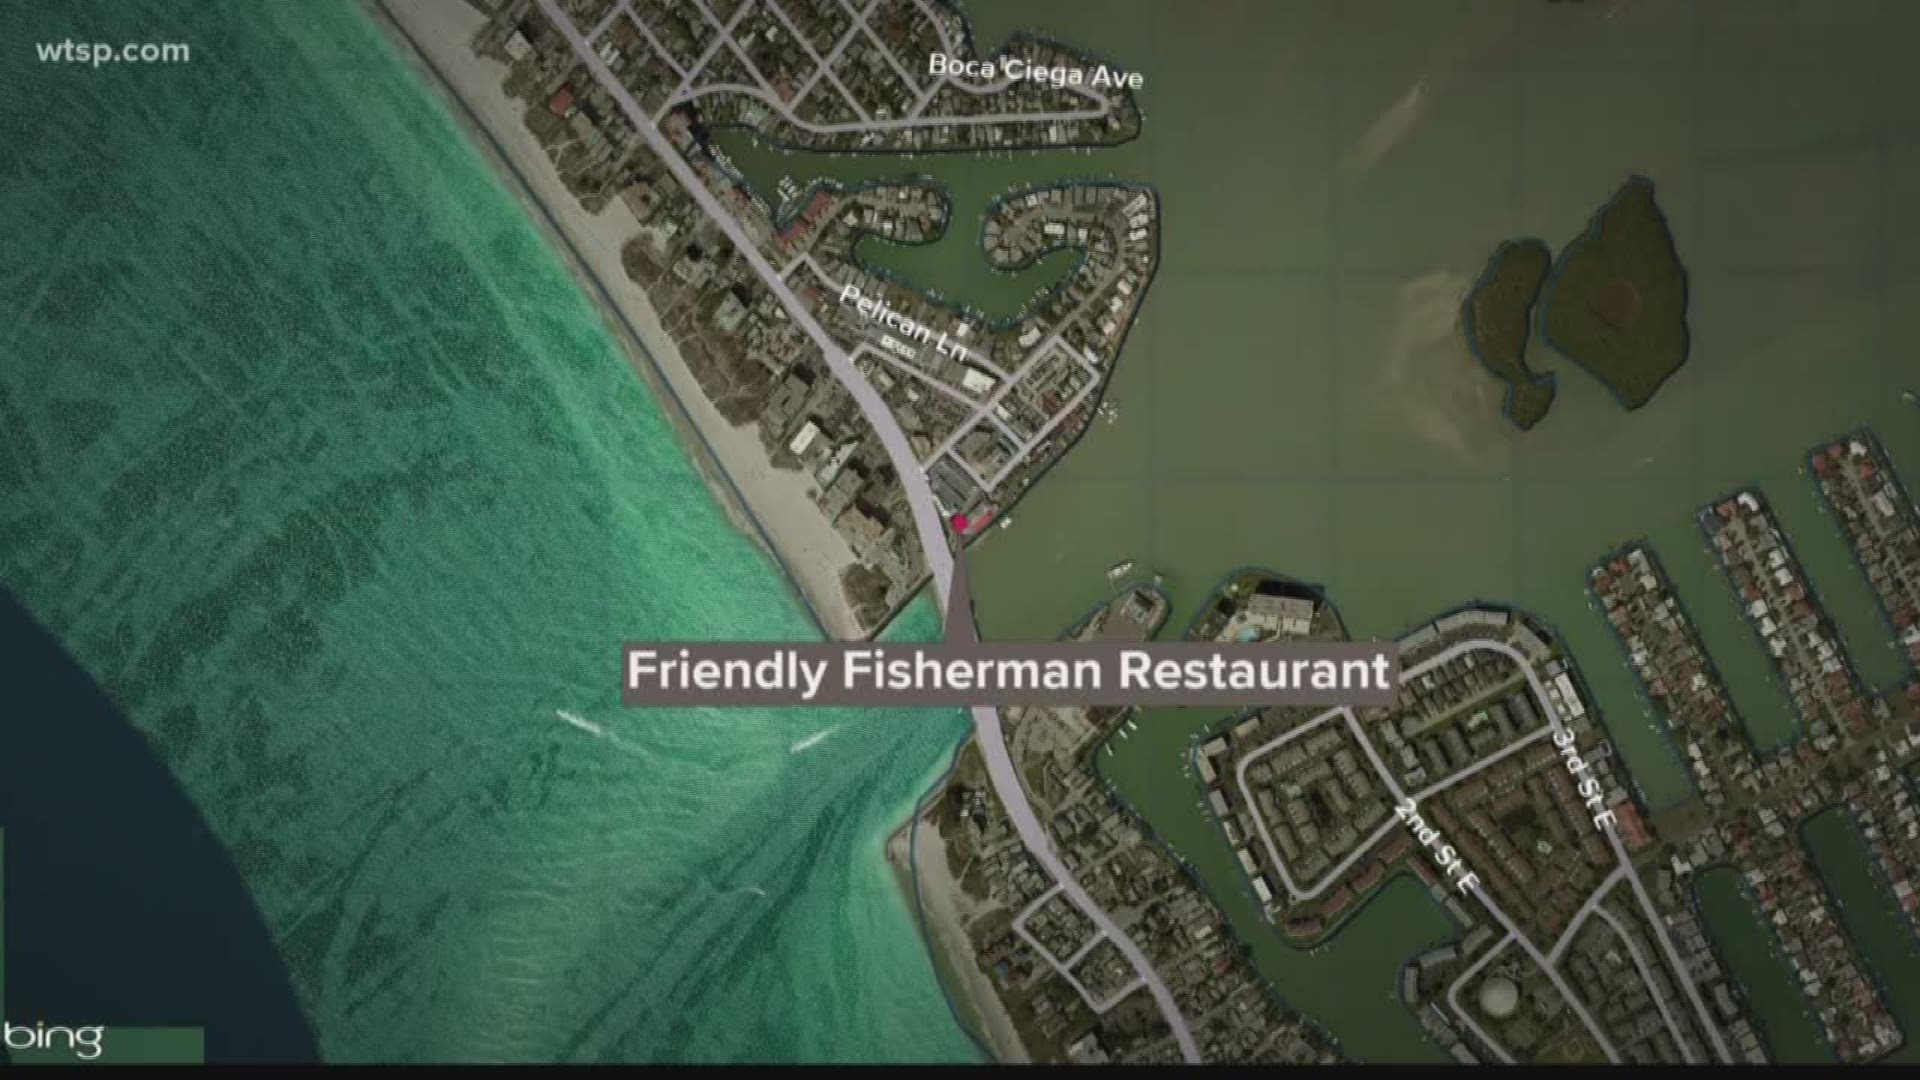 The Florida Department of Health in Pinellas County said it identified another case of hepatitis A in a restaurant worker.

The DOH-Pinellas said a person working at the Friendly Fisherman restaurant on Madeira Beach was infectious May 7-20.

Health officials say those who visited the restaurant during that period and have not been vaccinated for hepatitis A should get vaccinated. Those who have been vaccinated against hepatitis A do not have to get vaccinated again.

The DOH-Pinellas is offering vaccines 7:30 a.m. to 5 p.m. Monday to Friday at these locations:

St. Petersburg: 205 Dr. Martin Luther King Jr. St. N  
Pinellas Park: 6350 76th Ave. N  
Mid-County (Largo): 8751 Ulmerton Rd.
Clearwater: 310 N. Myrtle Ave.
Tarpon Springs: 301 S. Disston Ave.
The DOH has set up a 24-hour hotline has been set up for people who have questions about hepatitis A. The number to call is 727-824-6932.

Vaccination is the best way to prevent hepatitis A.